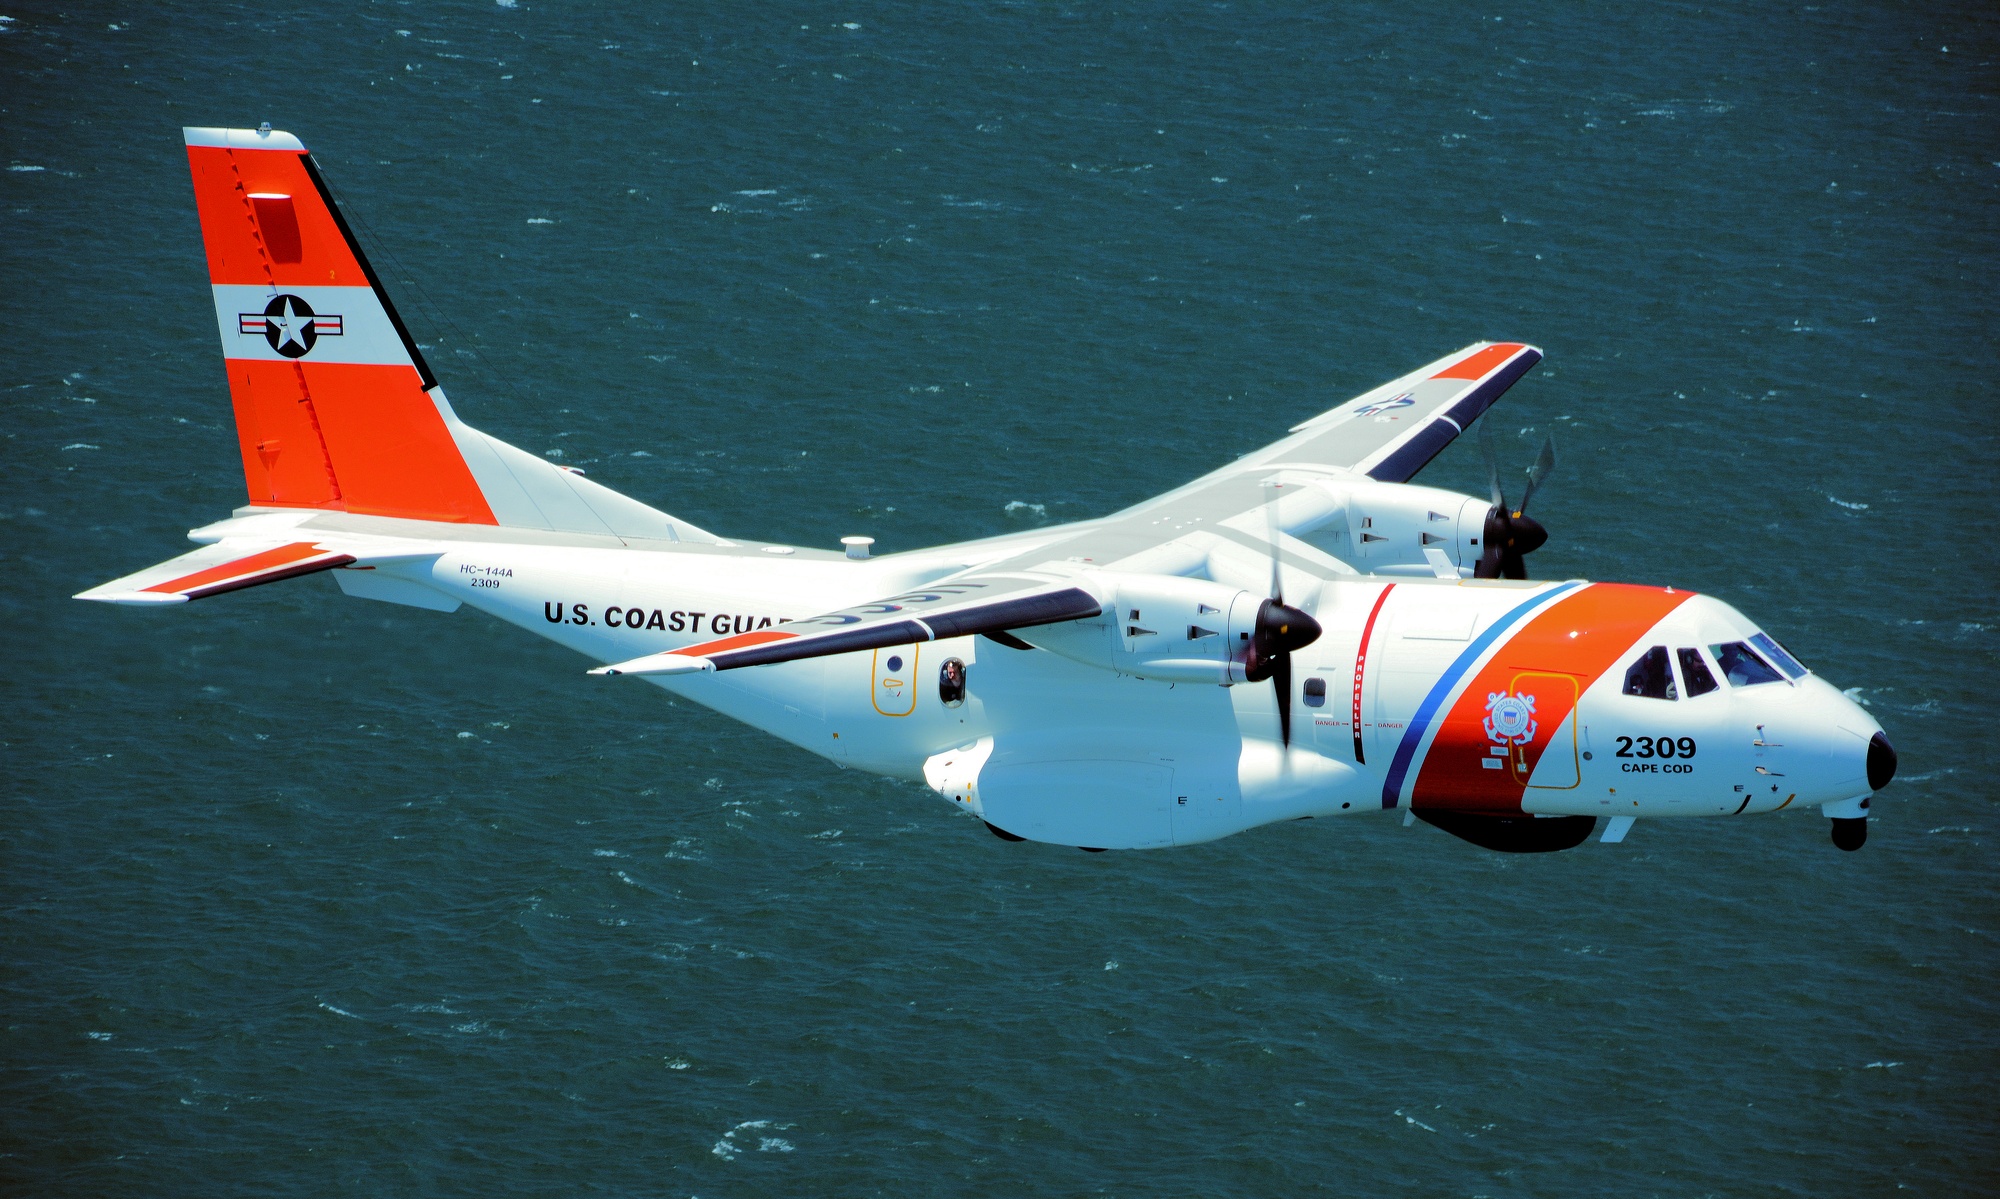 DVIDS - Images - Coast Guard Air Station Cape Cod HC-144 Ocean Sentry  [Image 4 of 6]